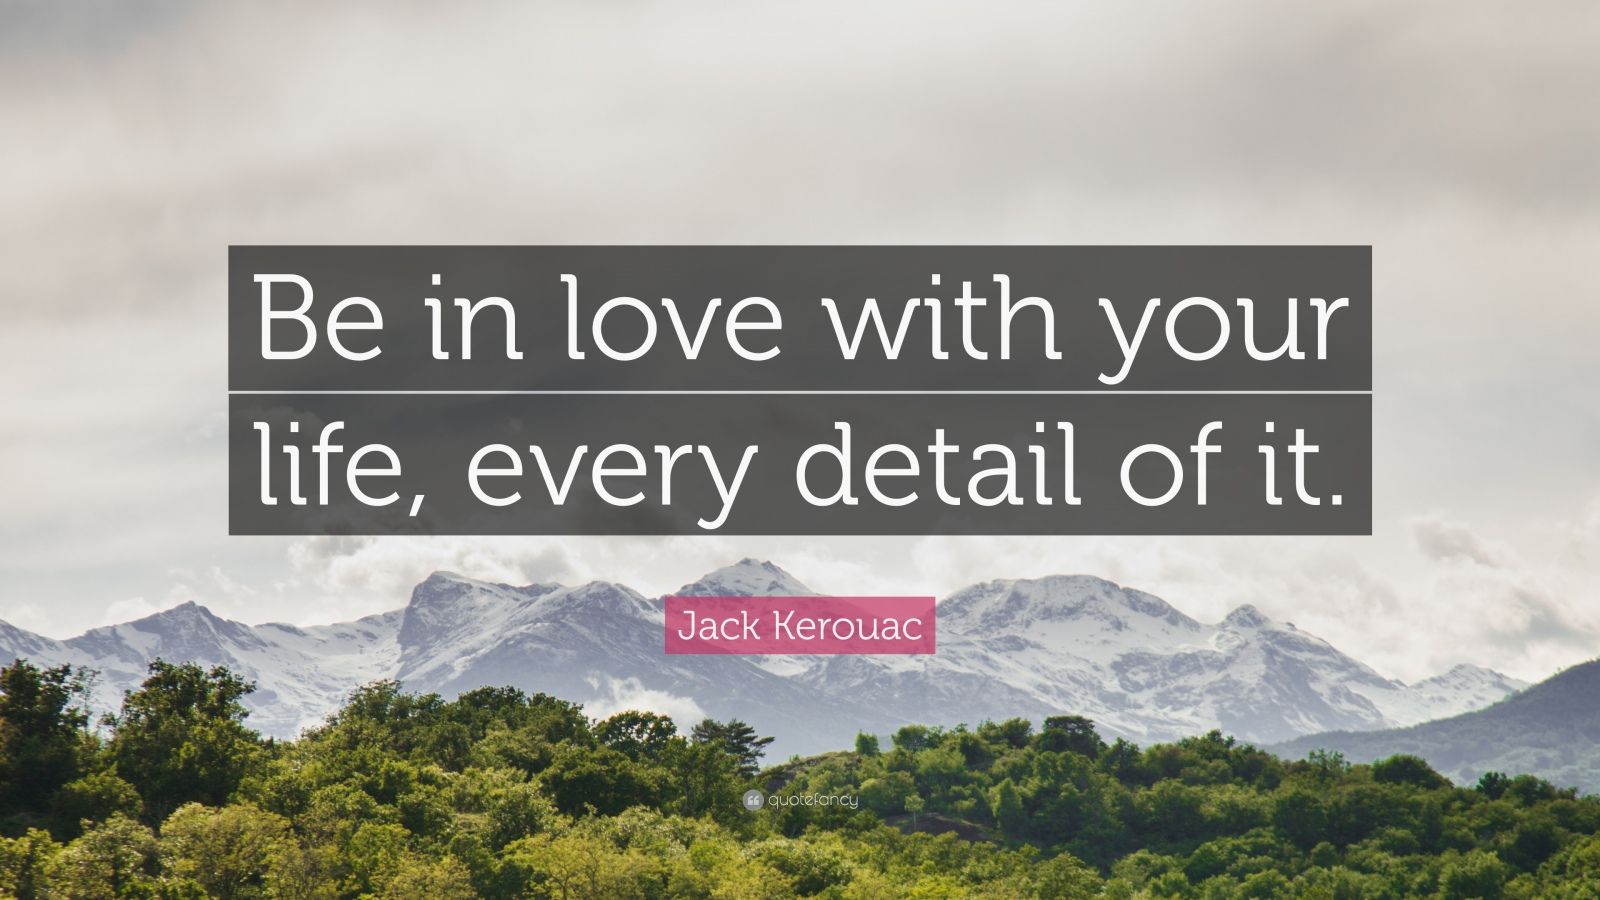 Jack Kerouac Quote “Be in love with your life every detail of it